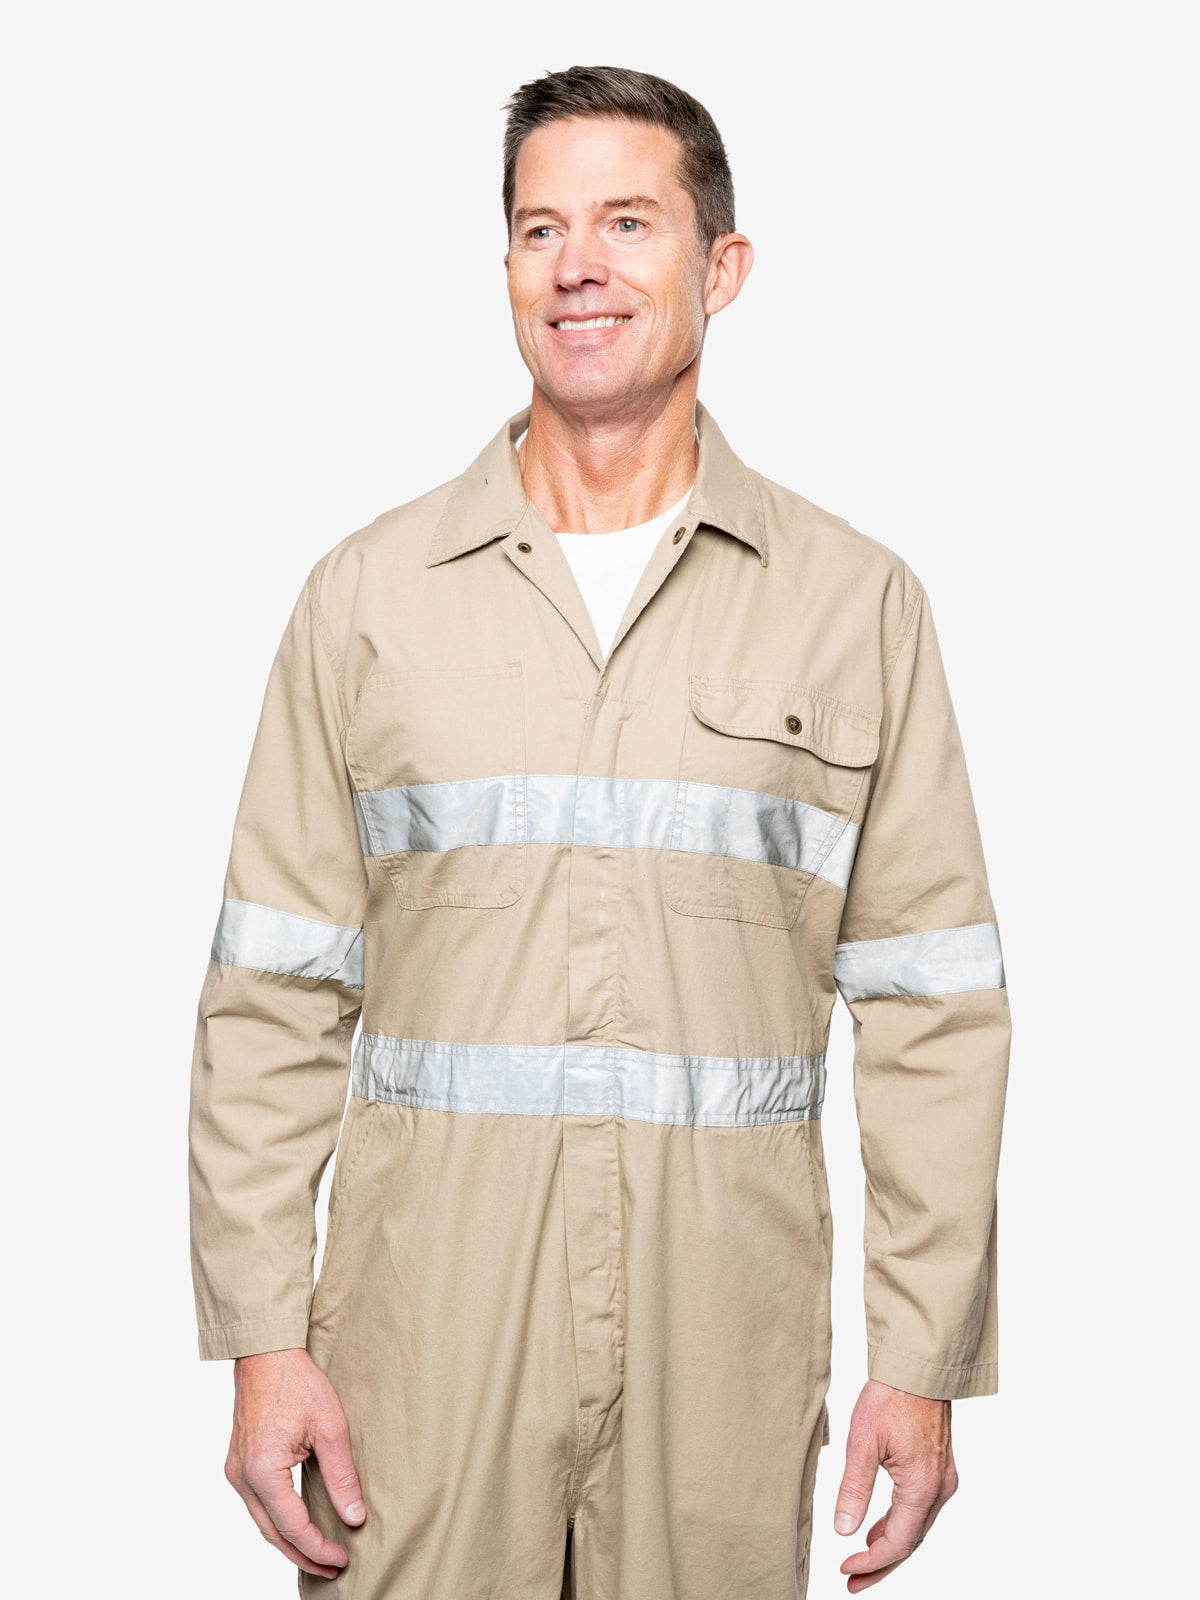 Insect Shield Men's Lightweight Cotton Coverall with Hi-Vis